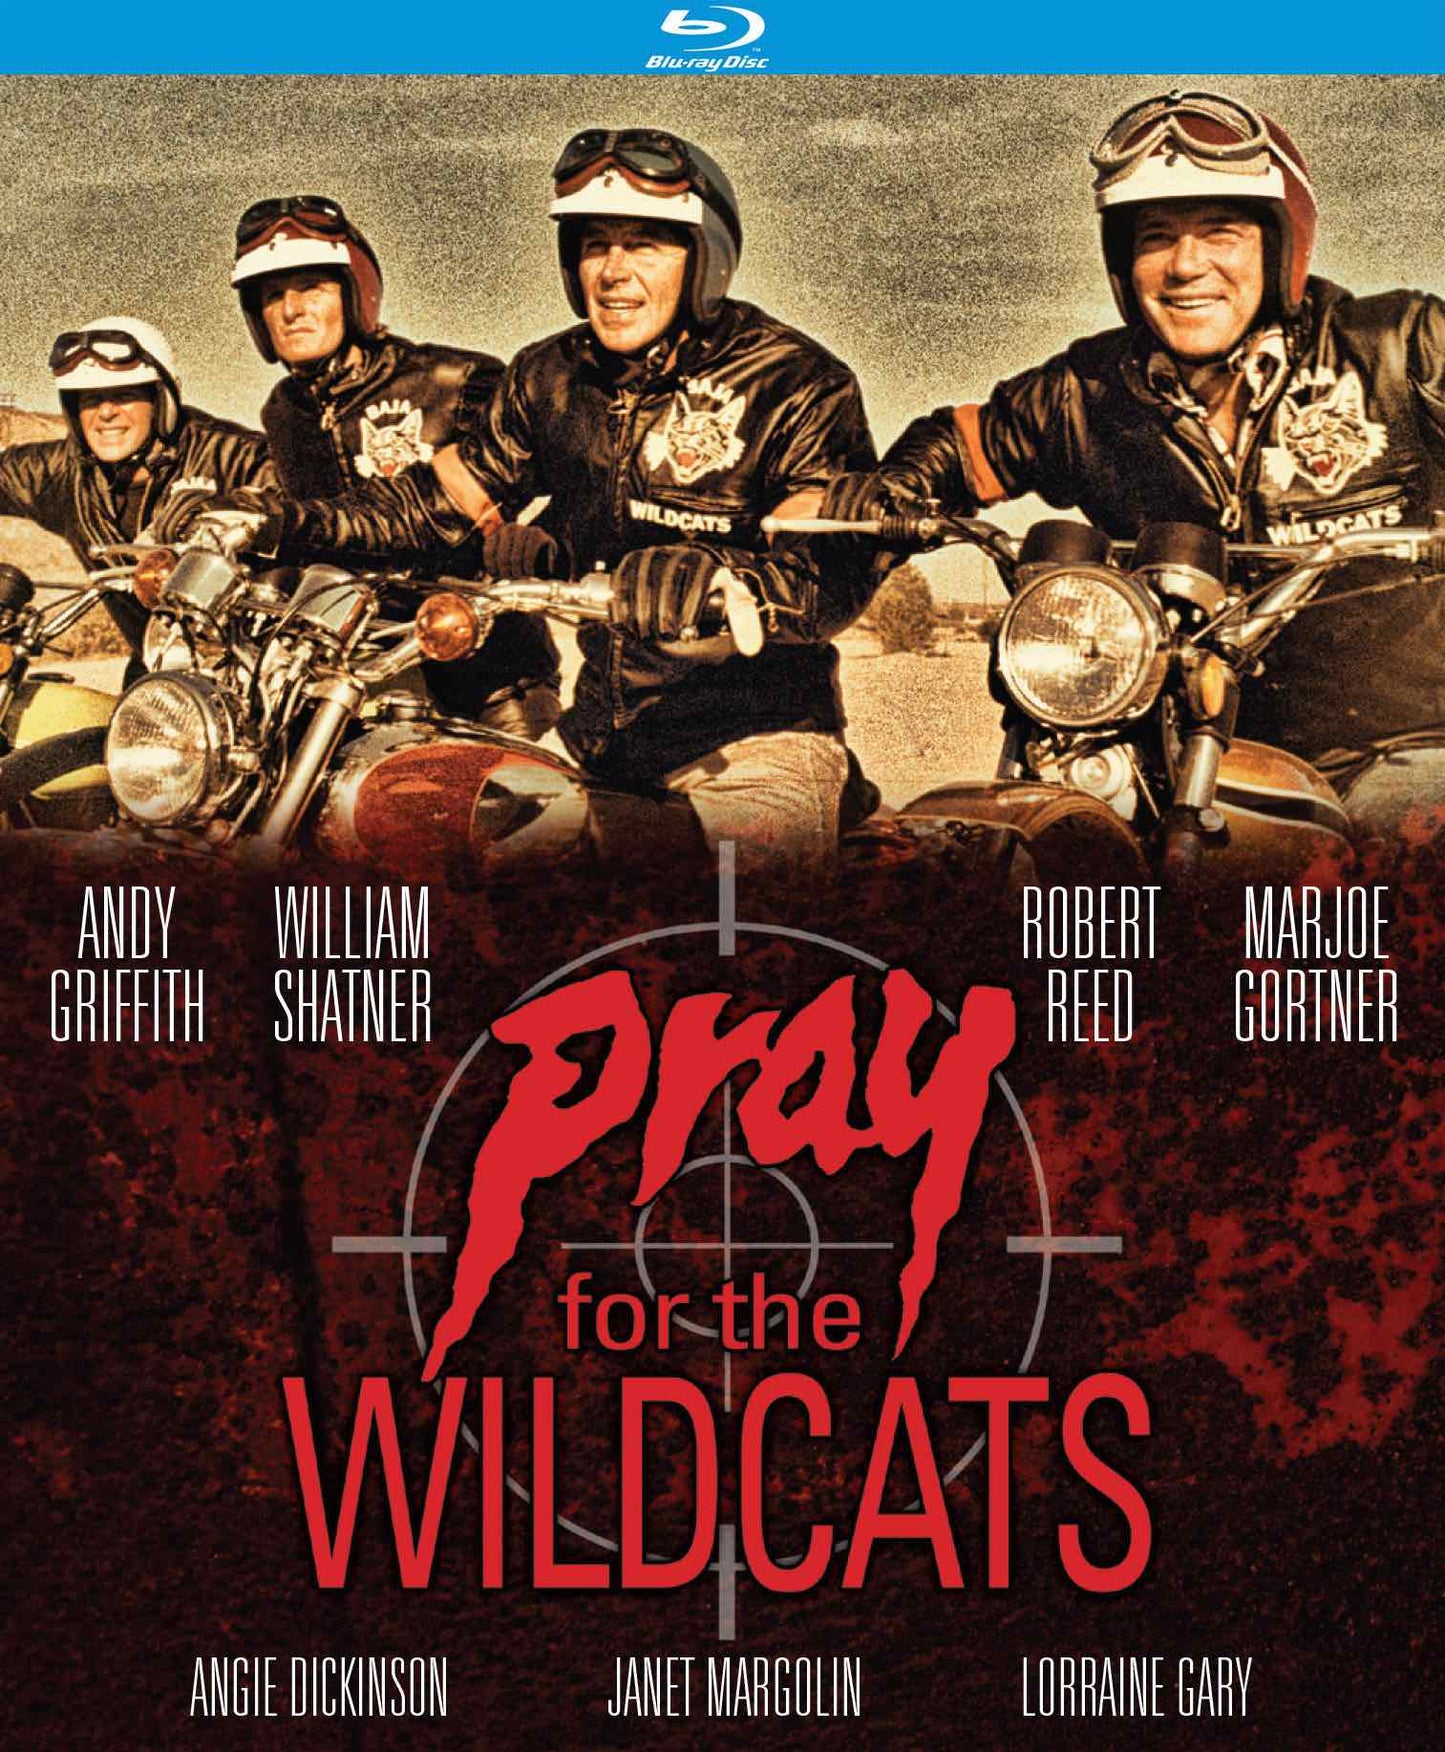 Pray for the Wildcats [Blu-ray] cover art